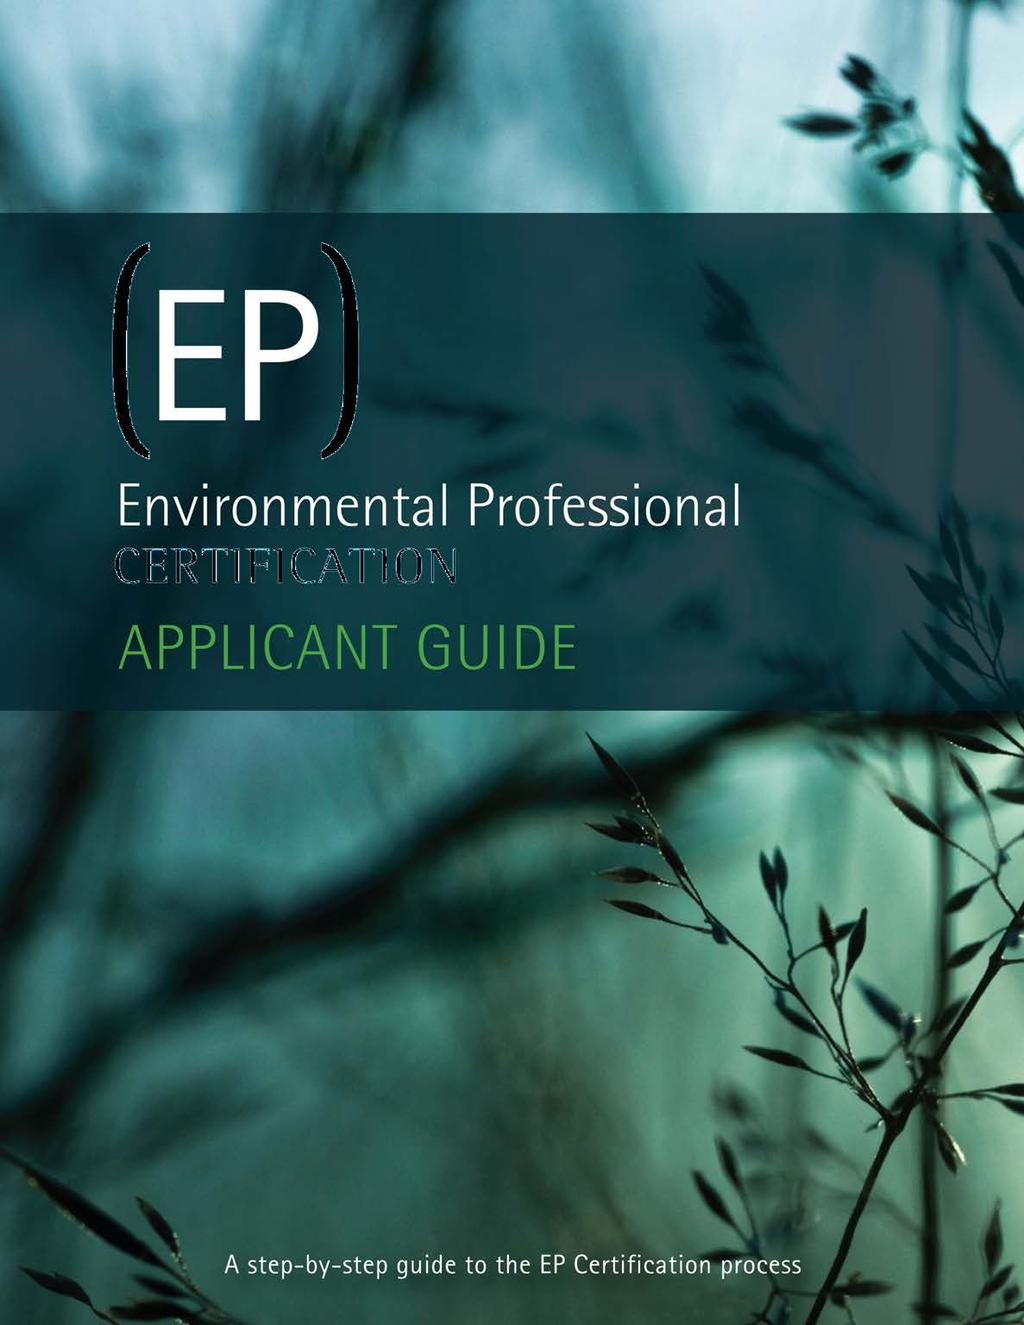 National Standard for Post-Secondary Environmental Programs Requirement for post-secondary